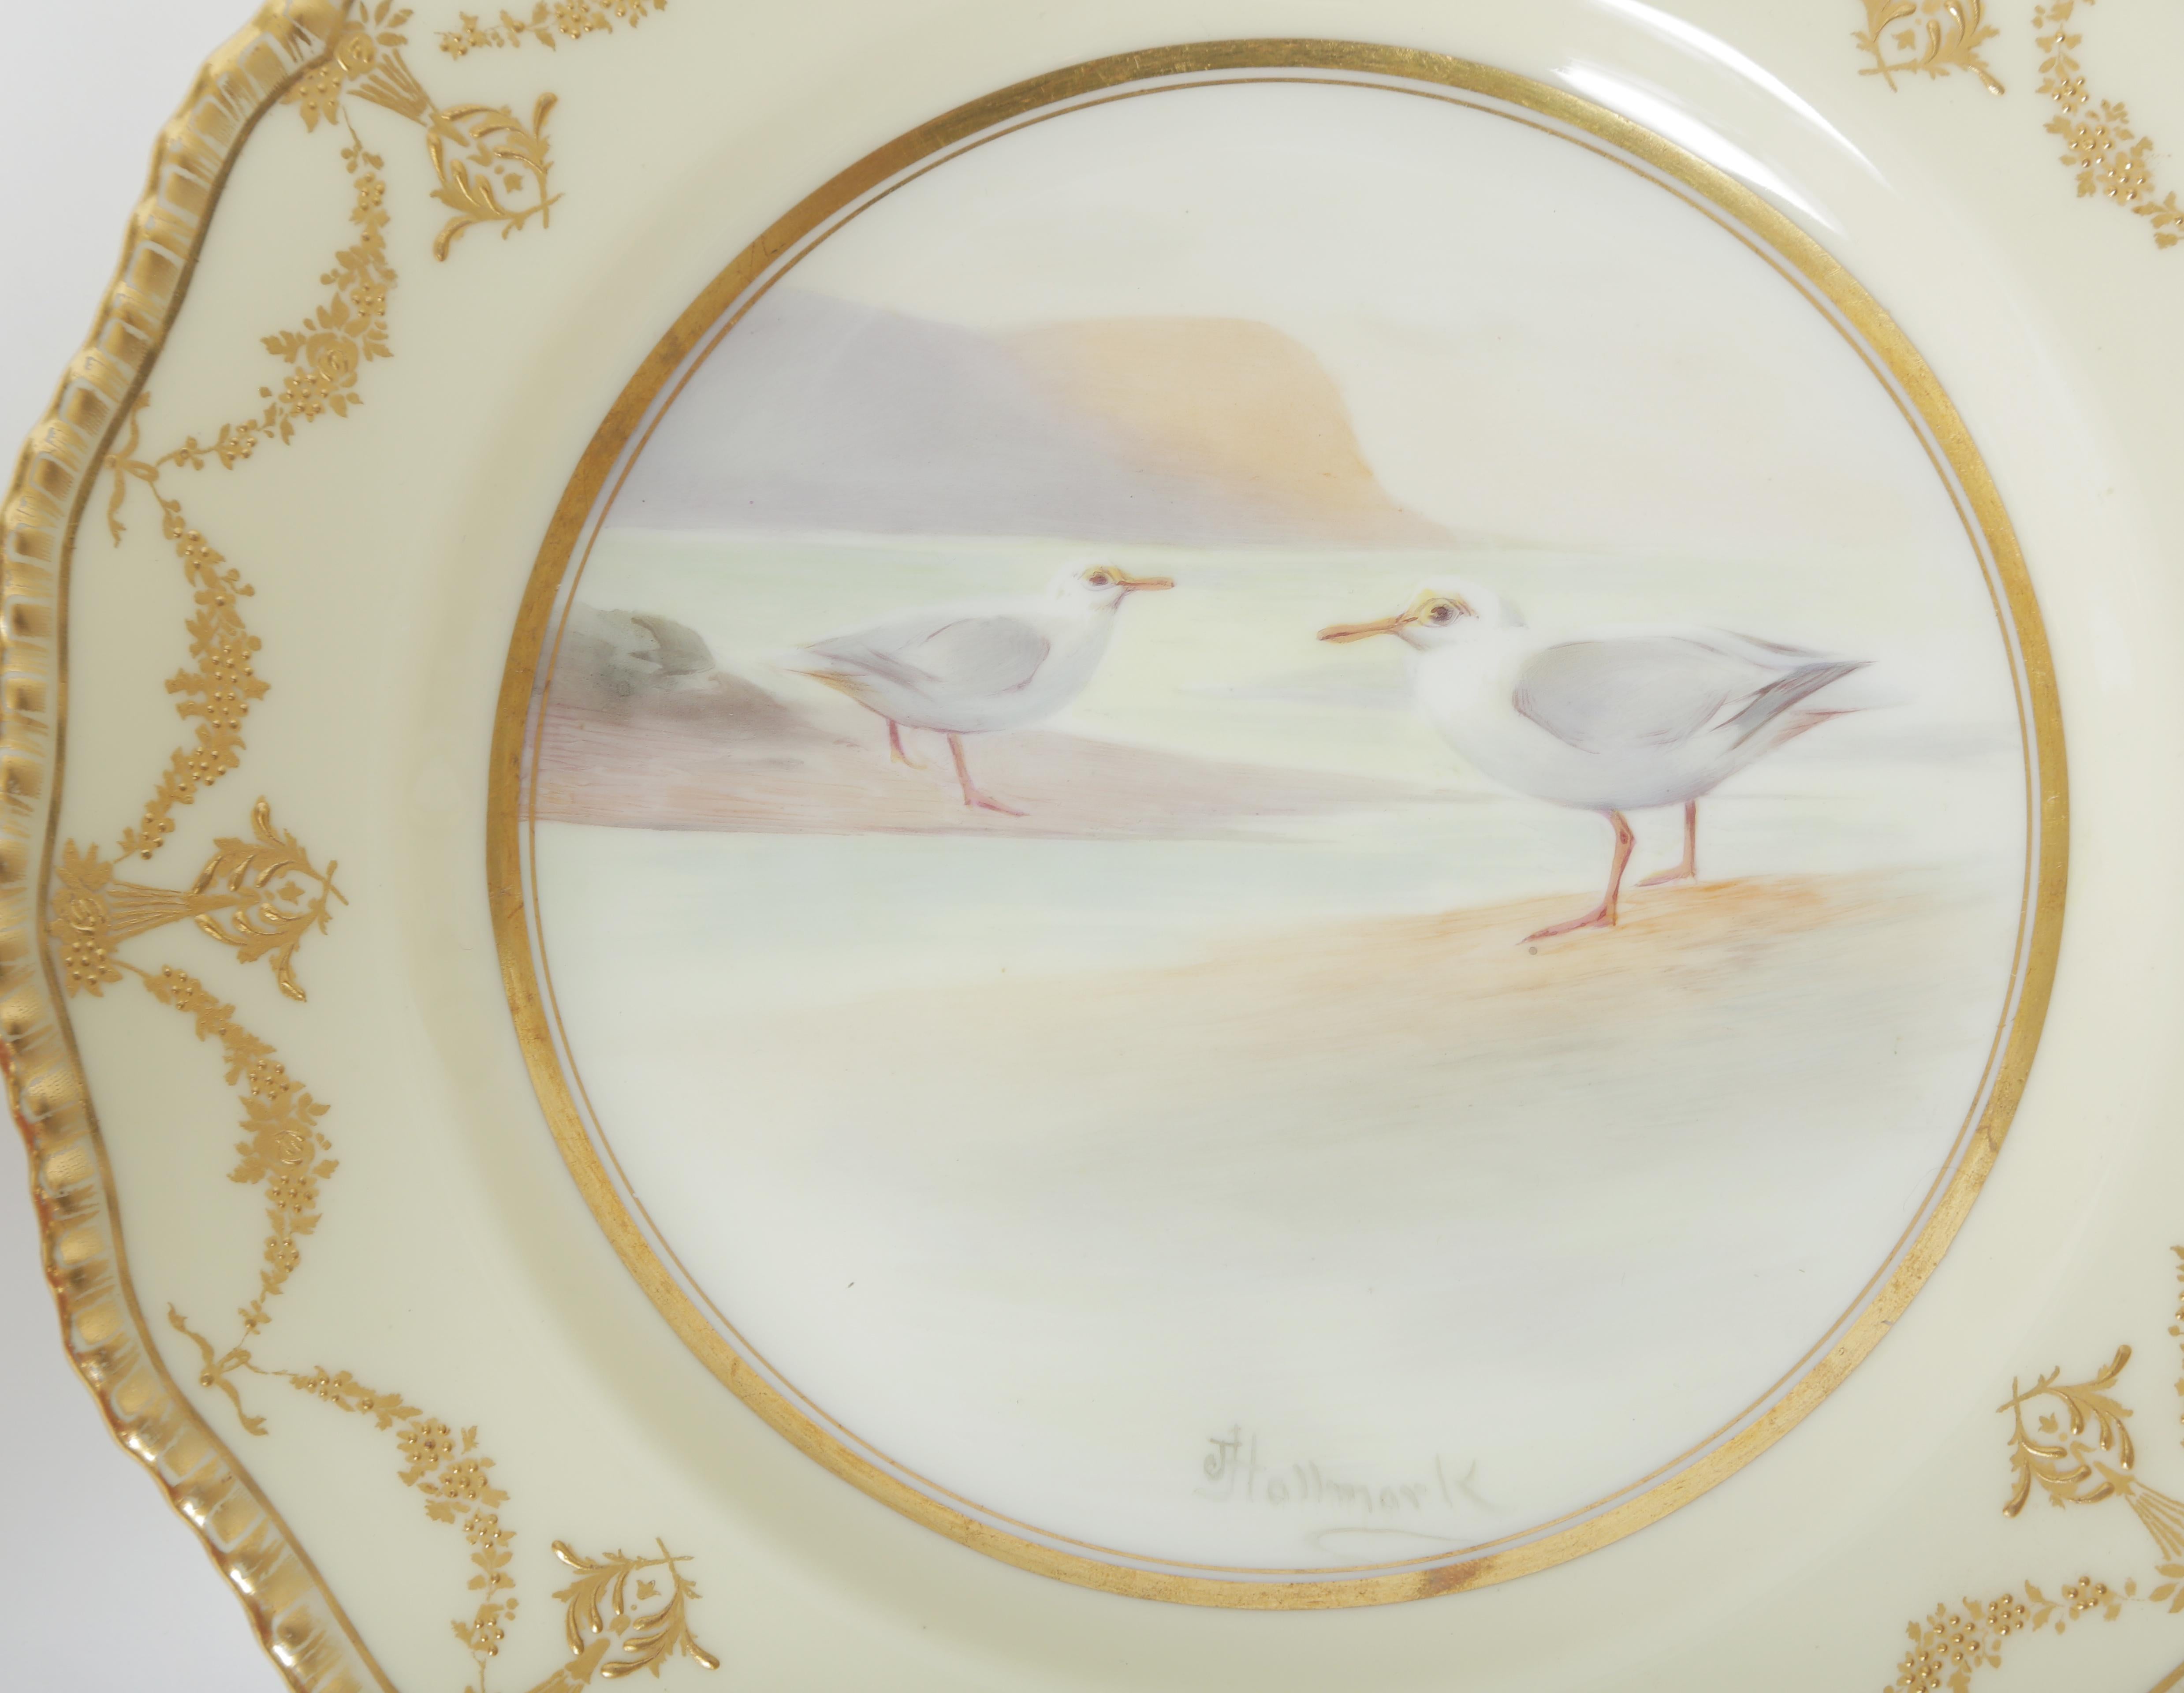 Ten Hand Painted Game Bird Plates, Raised Gold Accents, Antique English 5